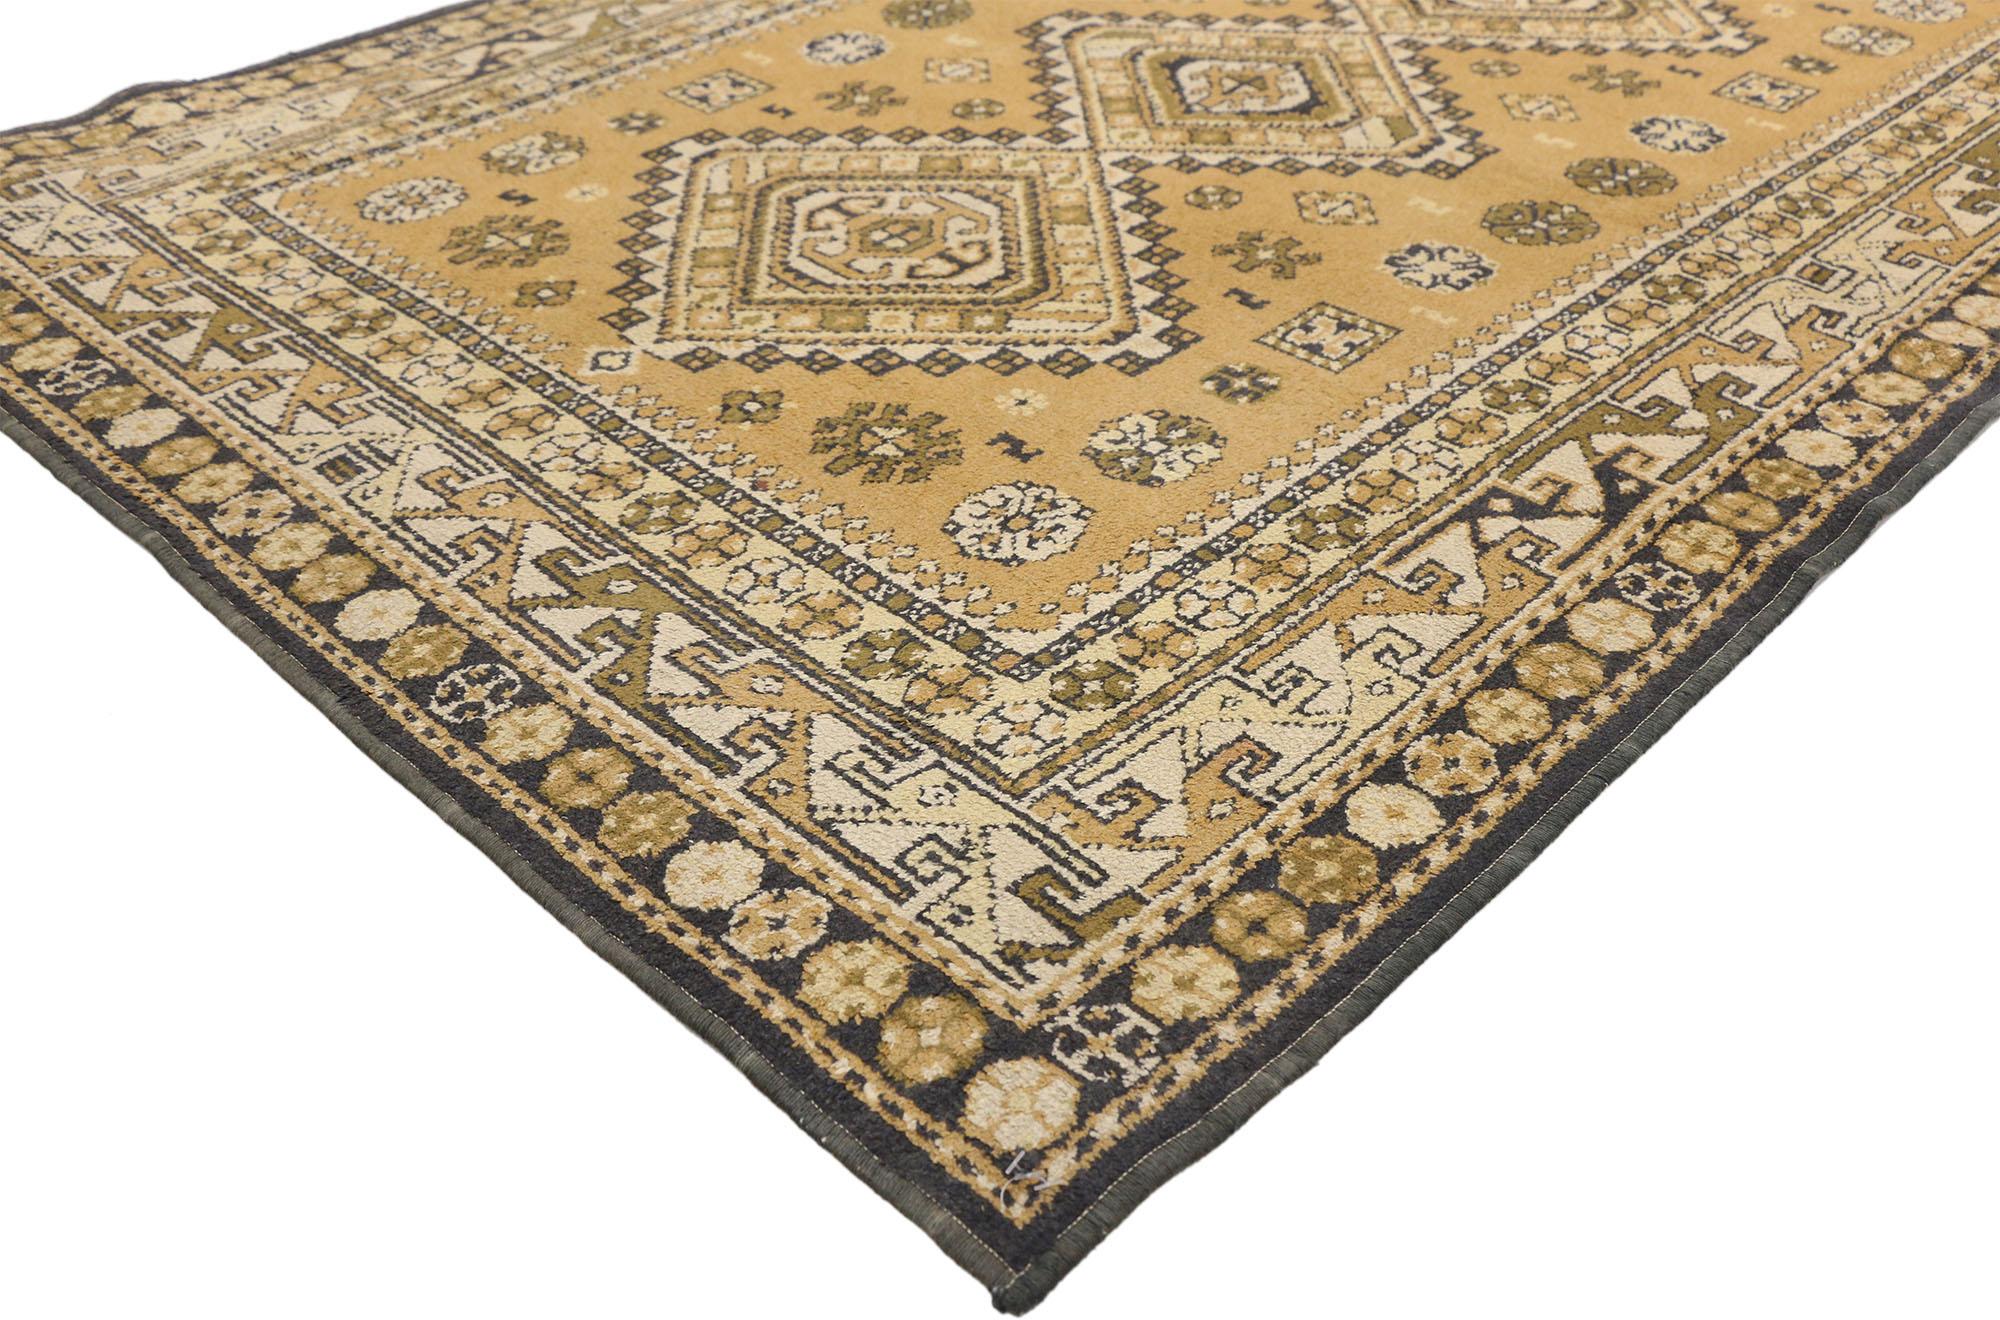 72249 Vintage Turkish Rug with Tribal Style, 03'10 x 05'05. Tribal enchantment dances with Anatolian symbolism in this hand knotted wool vintage Turkish rug. The neutral khaki colored backdrop sets the stage for the beguiling tribal design. Along